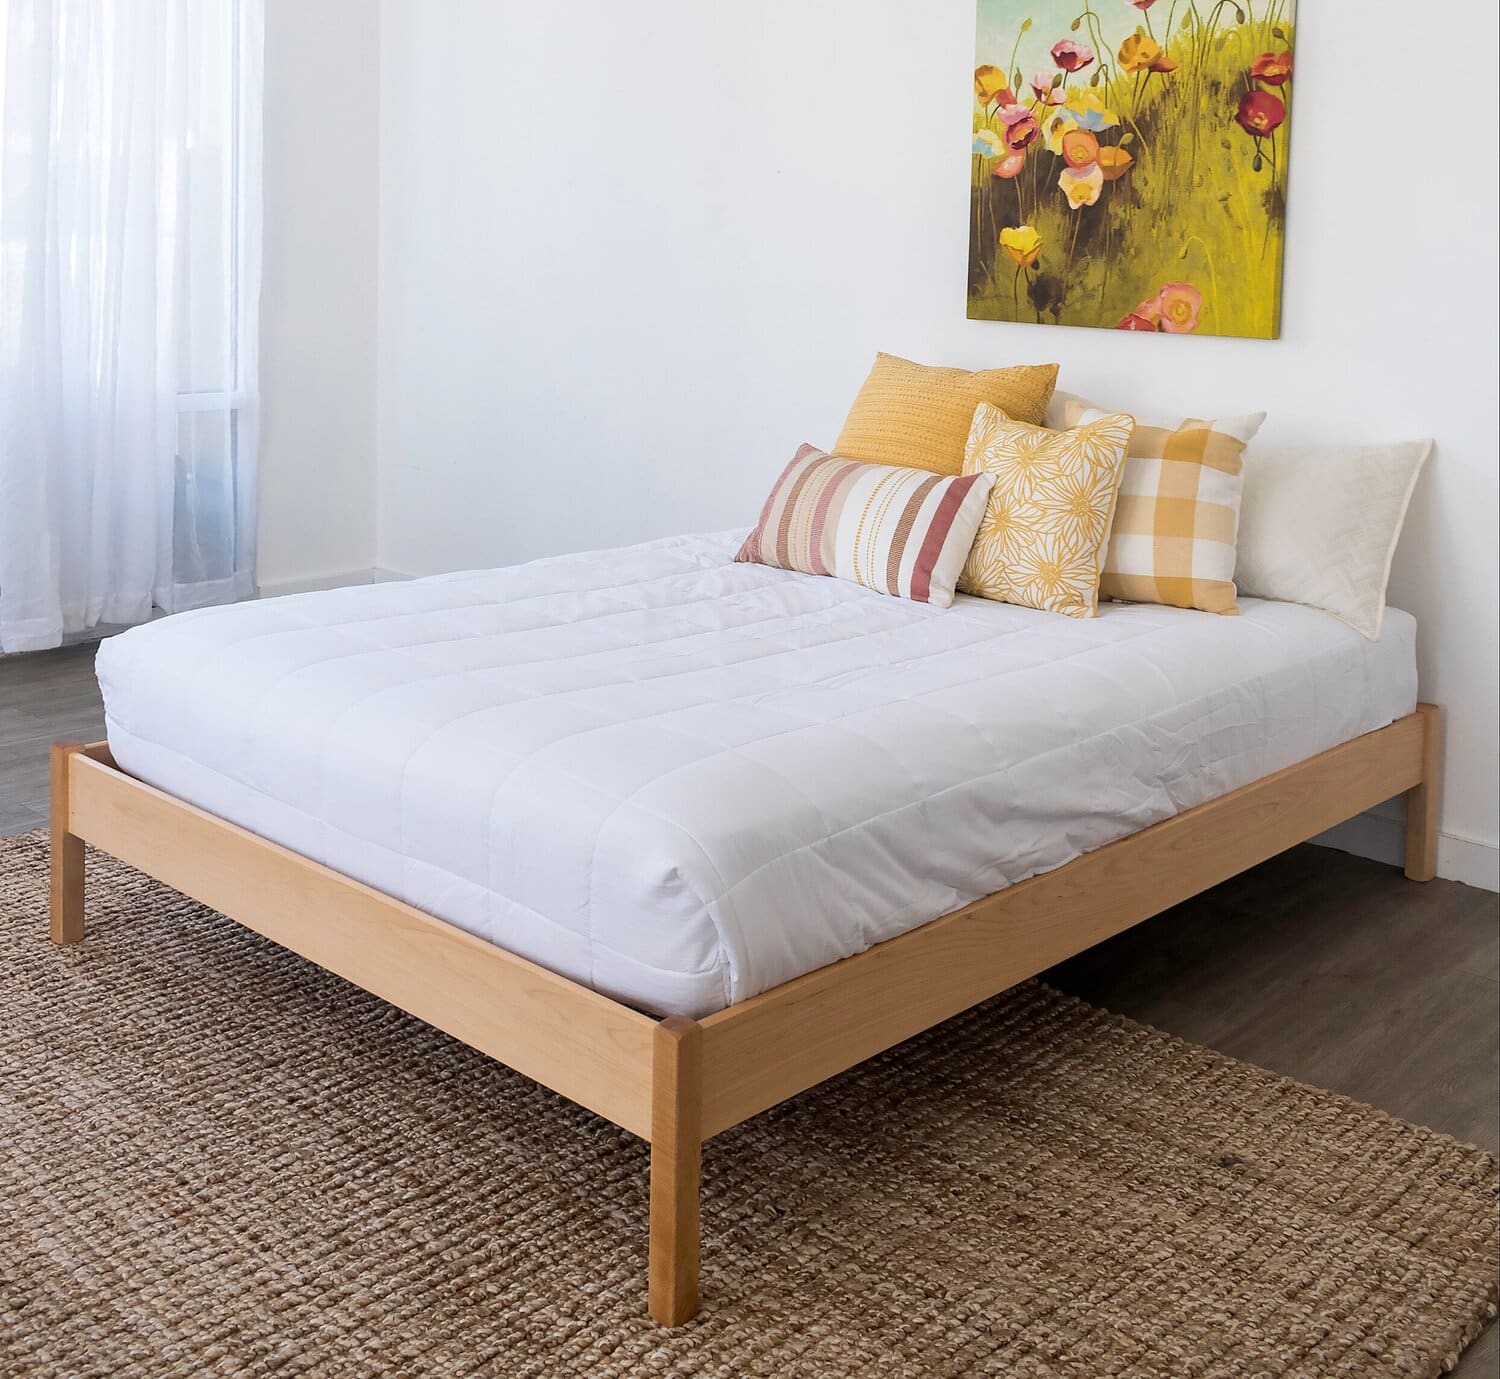 Clean Sleep Simple Bed Frame | Gimme the Good Stuff